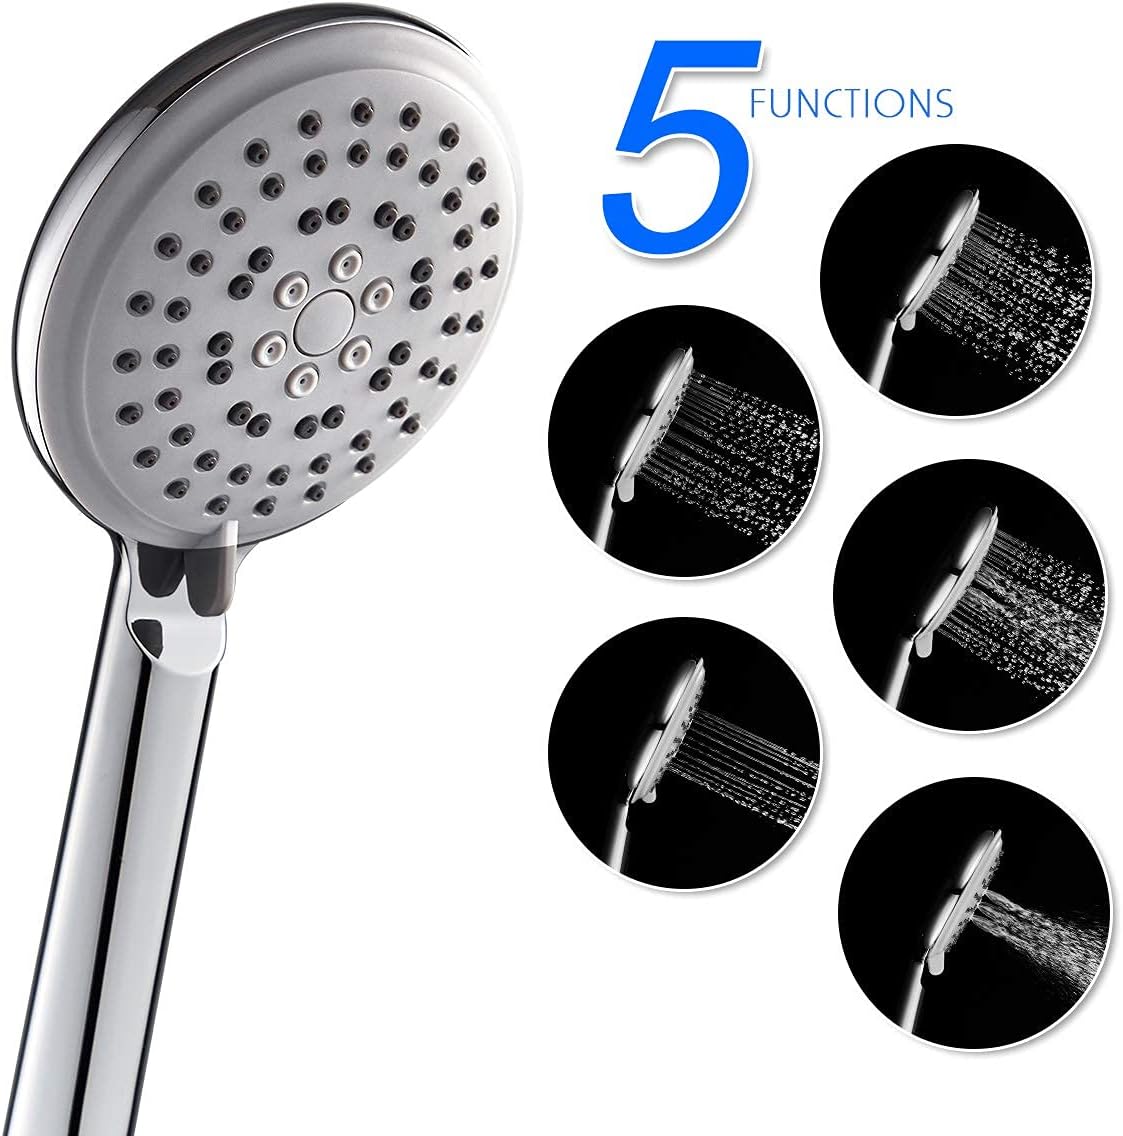 New ROVOGO 304 Stainless Steel Shower Panels System with 8-inch Rainfall Shower, 6 Body Jets and 5-Setting Handheld Shower Wand, Shower Tower with Adjustable Head, Stainless Steel Brushed, Retails $260+